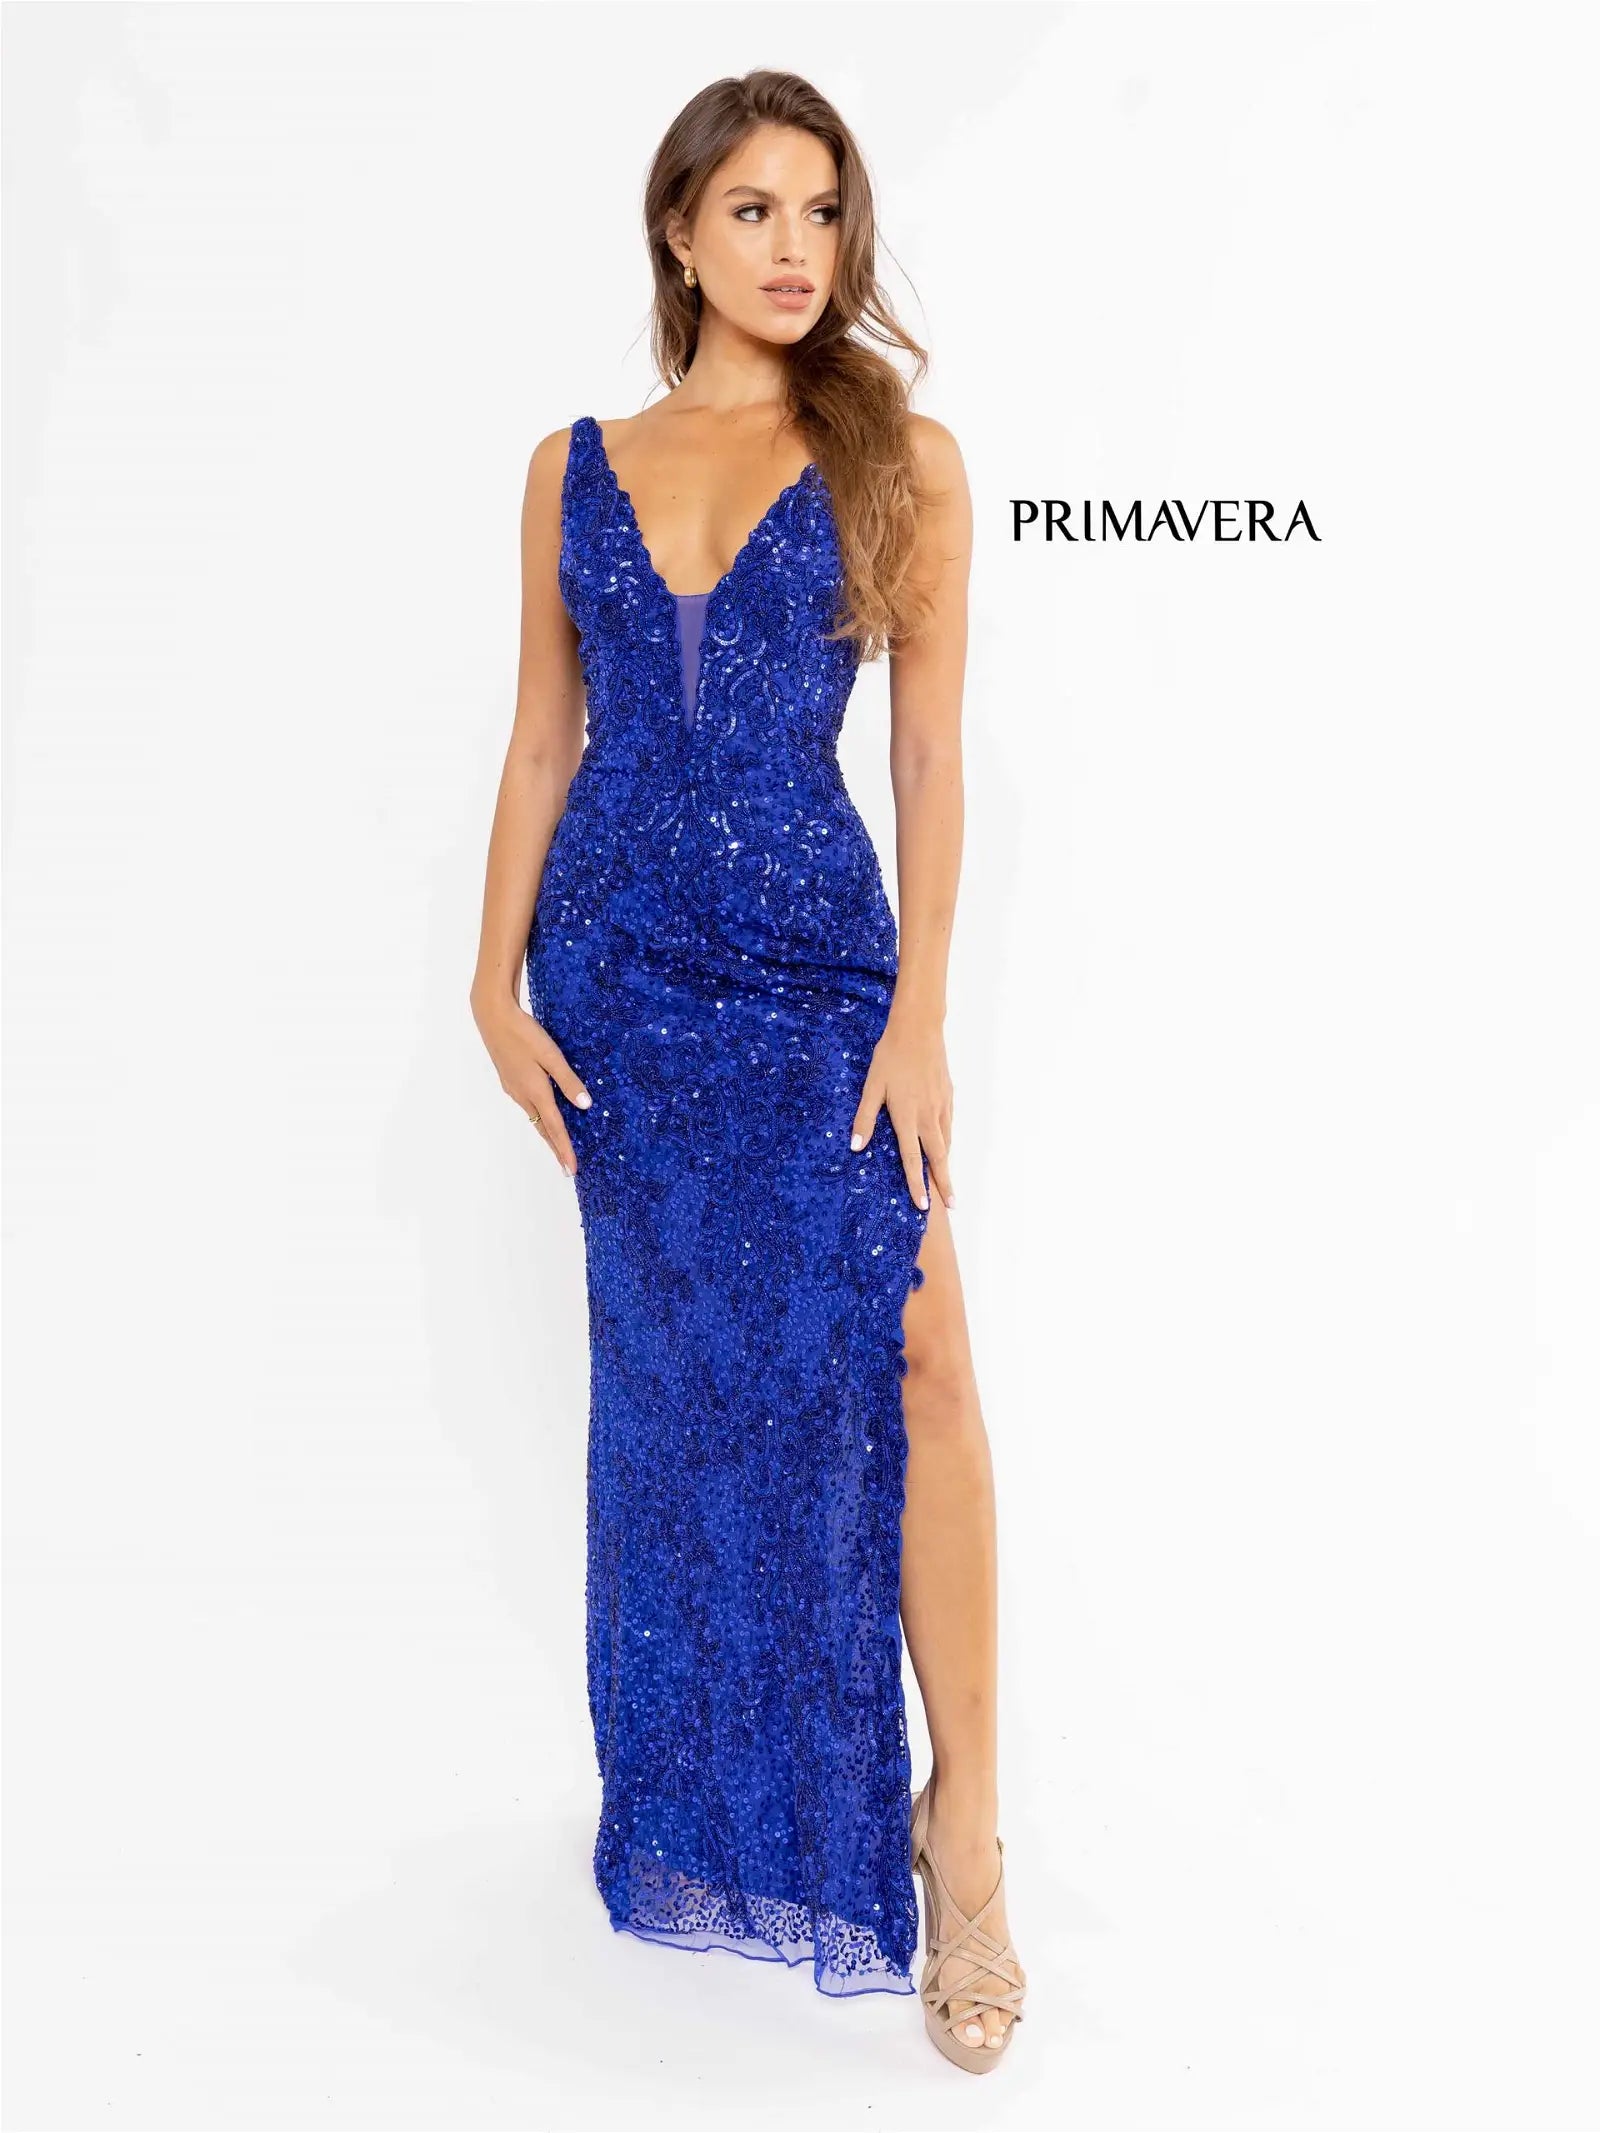 Primavera Couture 3953 Long Beaded Sequin Side Slit Prom Dress Formal Pageant Gown V Neck Backless lace embellished   Sizes: 000,00,0,2,4,6,8,10,12,14,16,18,20,22,24  Colors: Royal Blue, Ivory